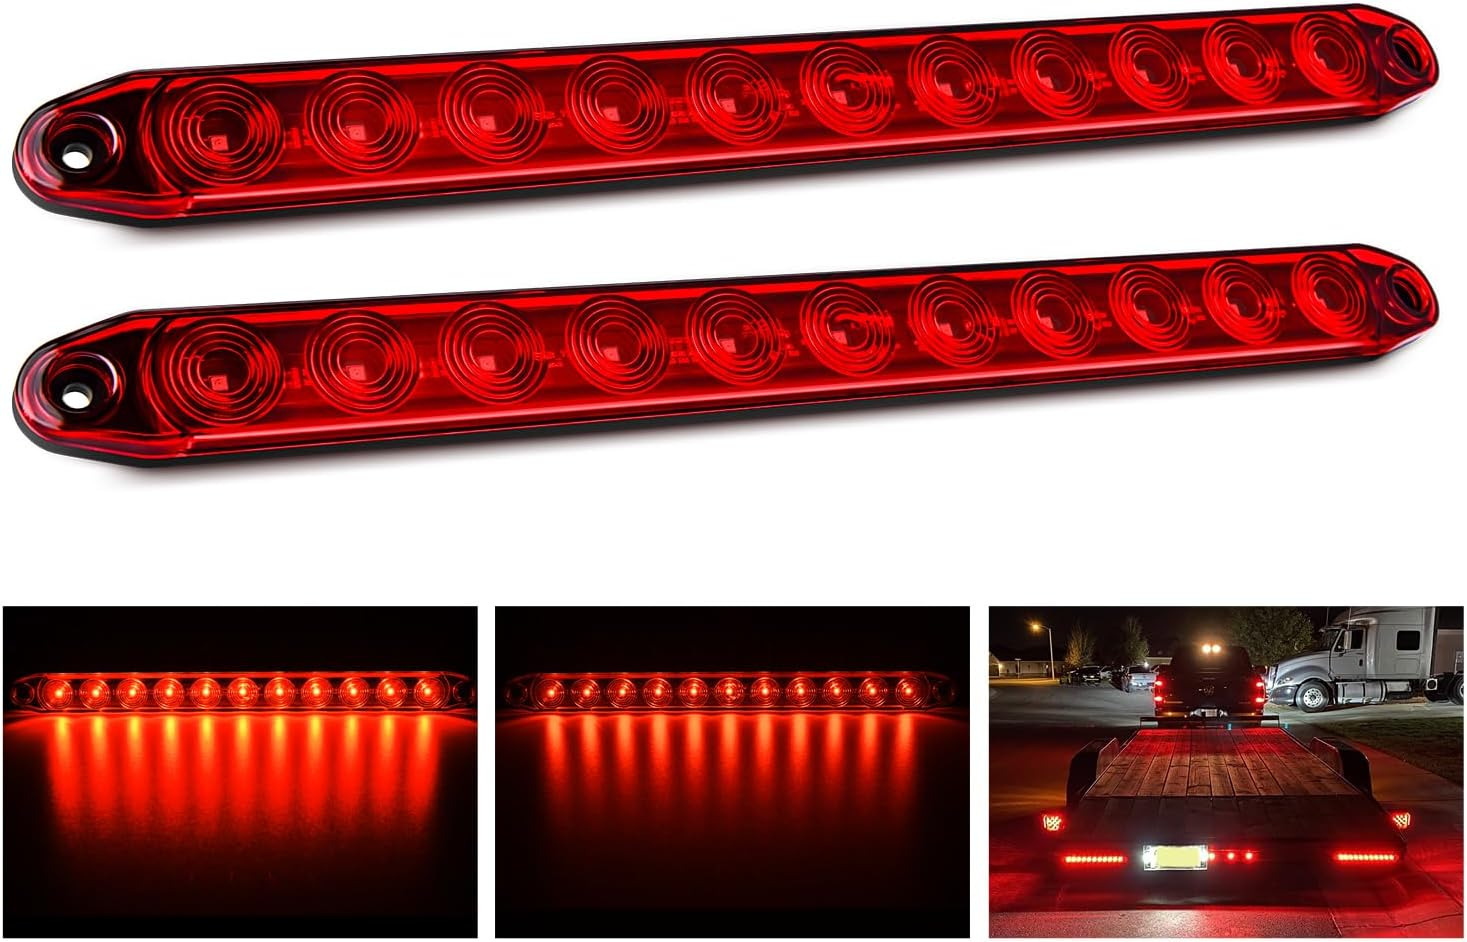 Nilight 2PCS 16Inch 11 LED Red Trailer Light Bar for Park Stop Turn Signals Tail